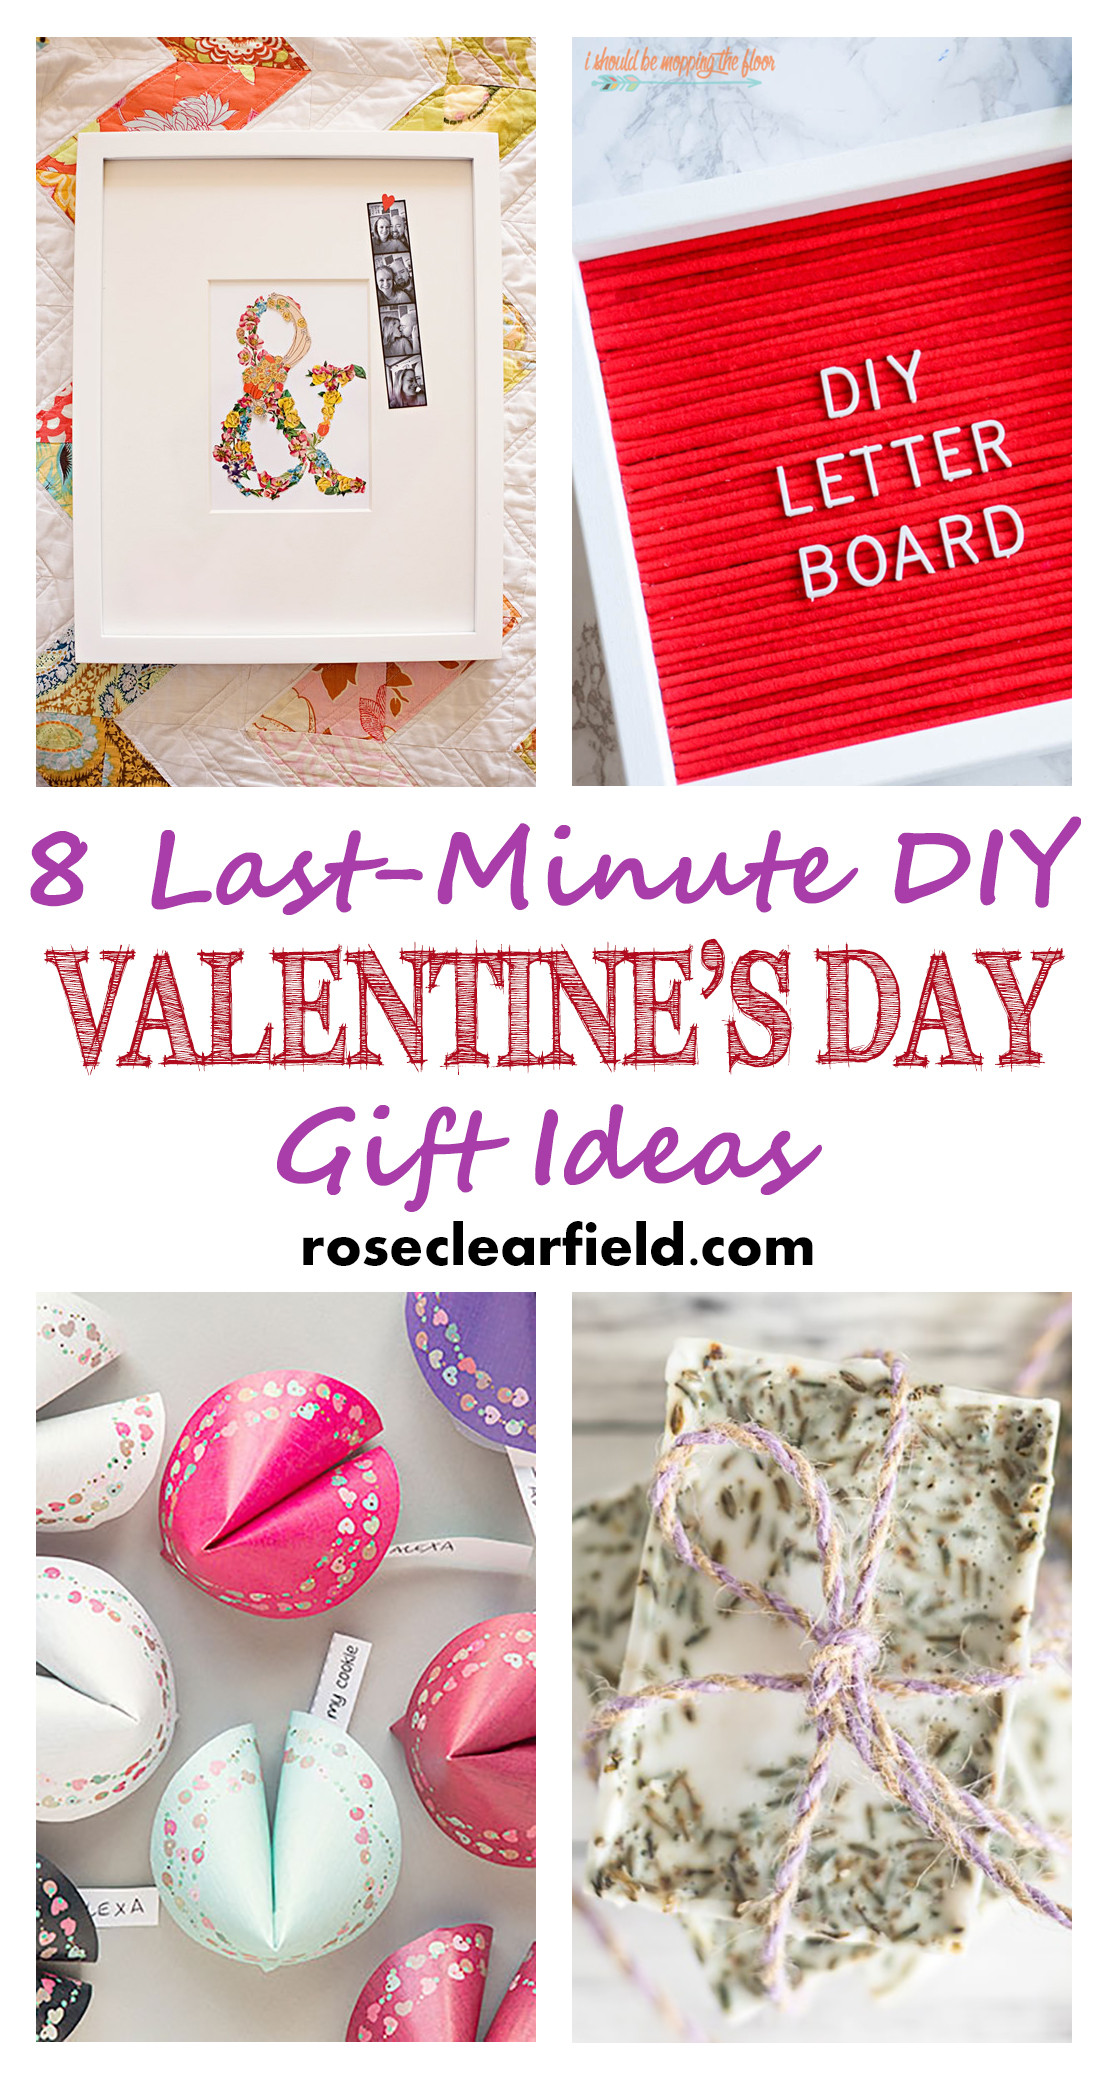 Valentines Day Present Ideas
 Last Minute DIY Valentine s Day Gift Ideas • Rose Clearfield